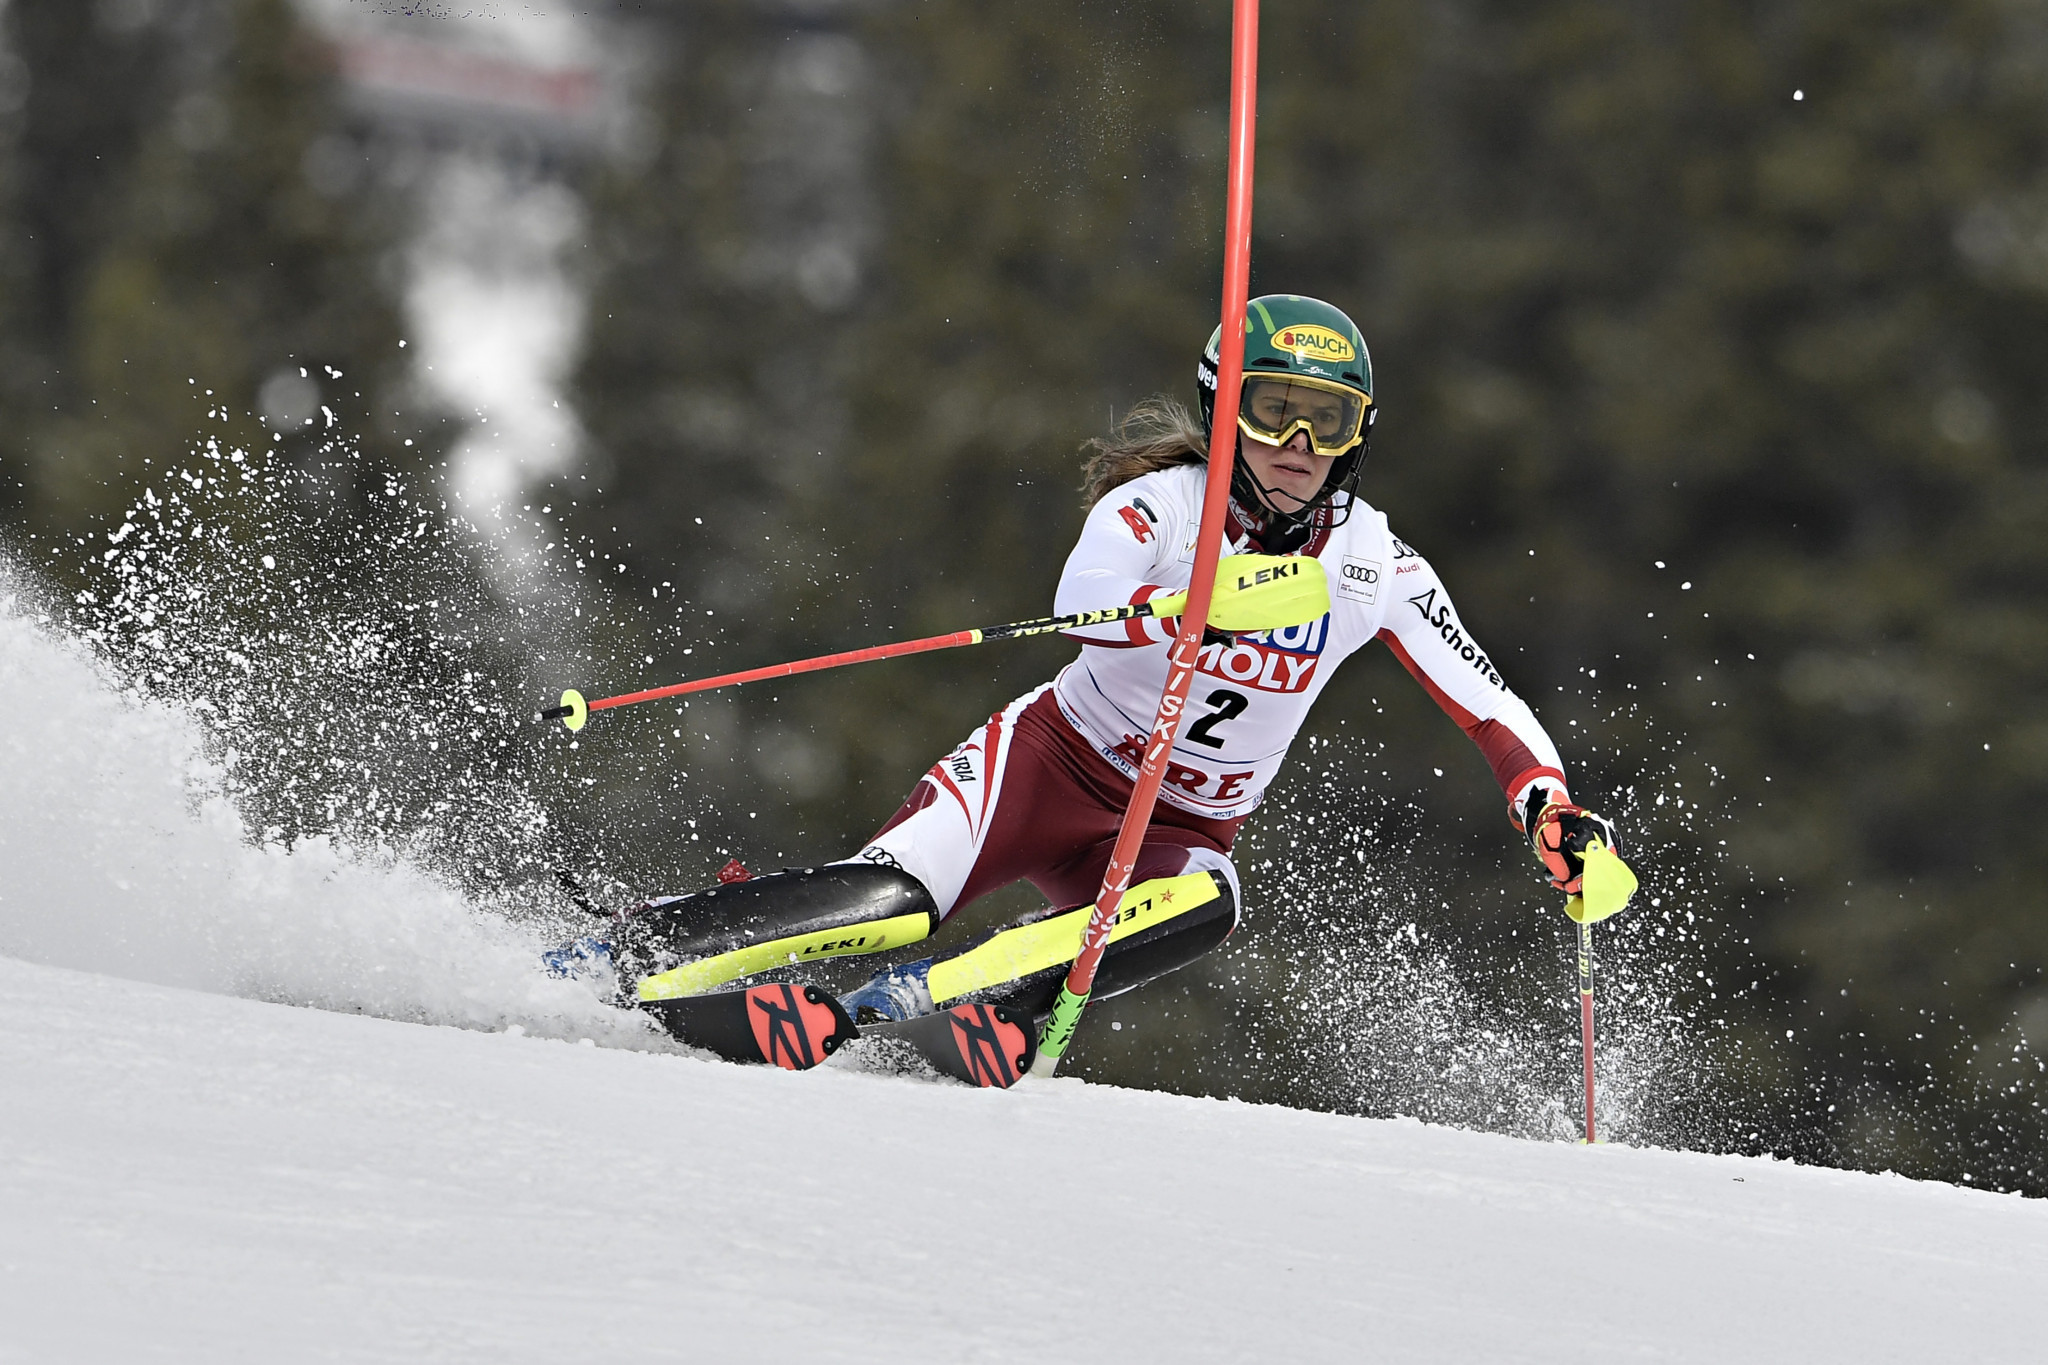 Katharina Liensberger of Austria finished second in today's slalom race ©Getty Images